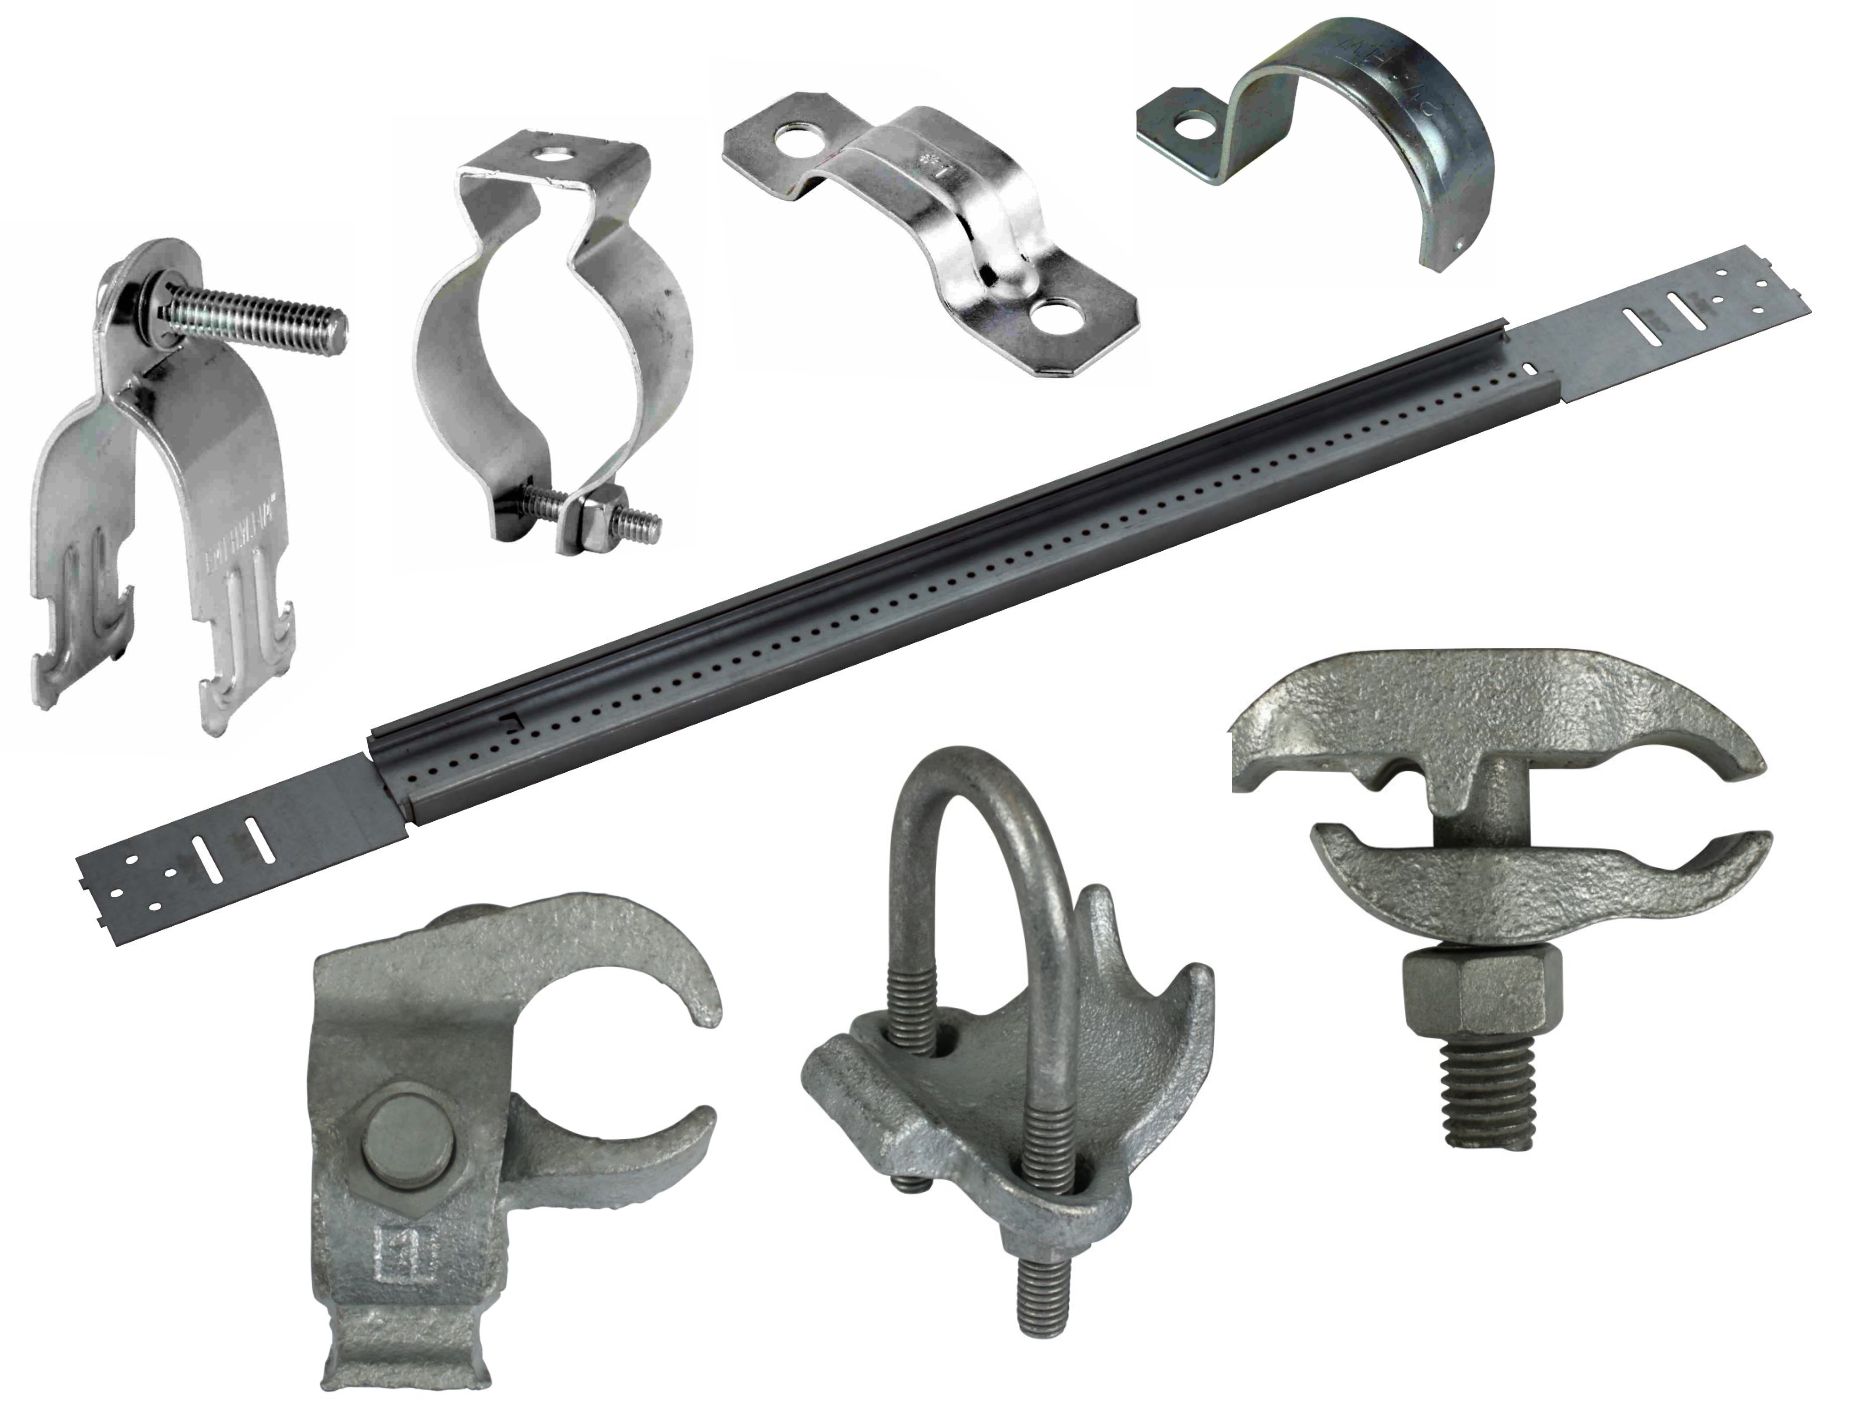 Conduit Supports, Straps, Clamps & Hangers